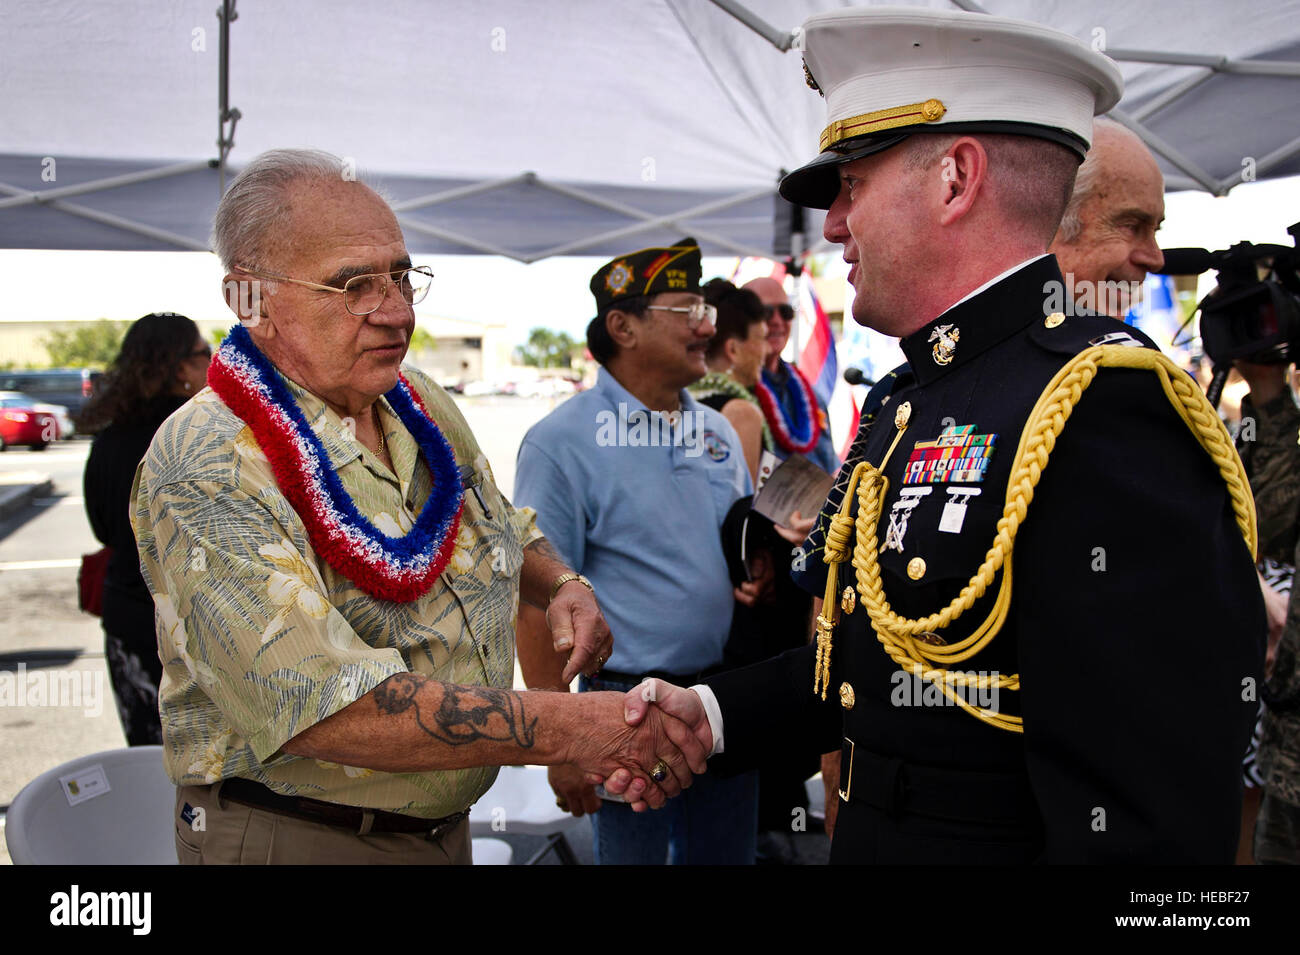 U.S. Marine Corps Capt. Mark H. Halle, Joint Prisoner of War/Missing in Action Accounting Command, Aide De Camp speaks with former Vietnam POW, retired U.S. Marine Corps Chief Warrant Officer 4 Bill Thomas, after a ceremony marking the 40th anniversary of Operation Homecoming, April 4, 2013 at Joint Base Pearl Harbor-Hickam, Hawaii. In 1973, the last Vietnam conflict prisoner of war landed at what was then Hickam Air Force Base. Thomas was captured, May 19, 1972, when during a combat mission over South Vietnam, his aircraft was shot down a few miles from Quang Tri City, South Vietnam. Thomas s Stock Photo